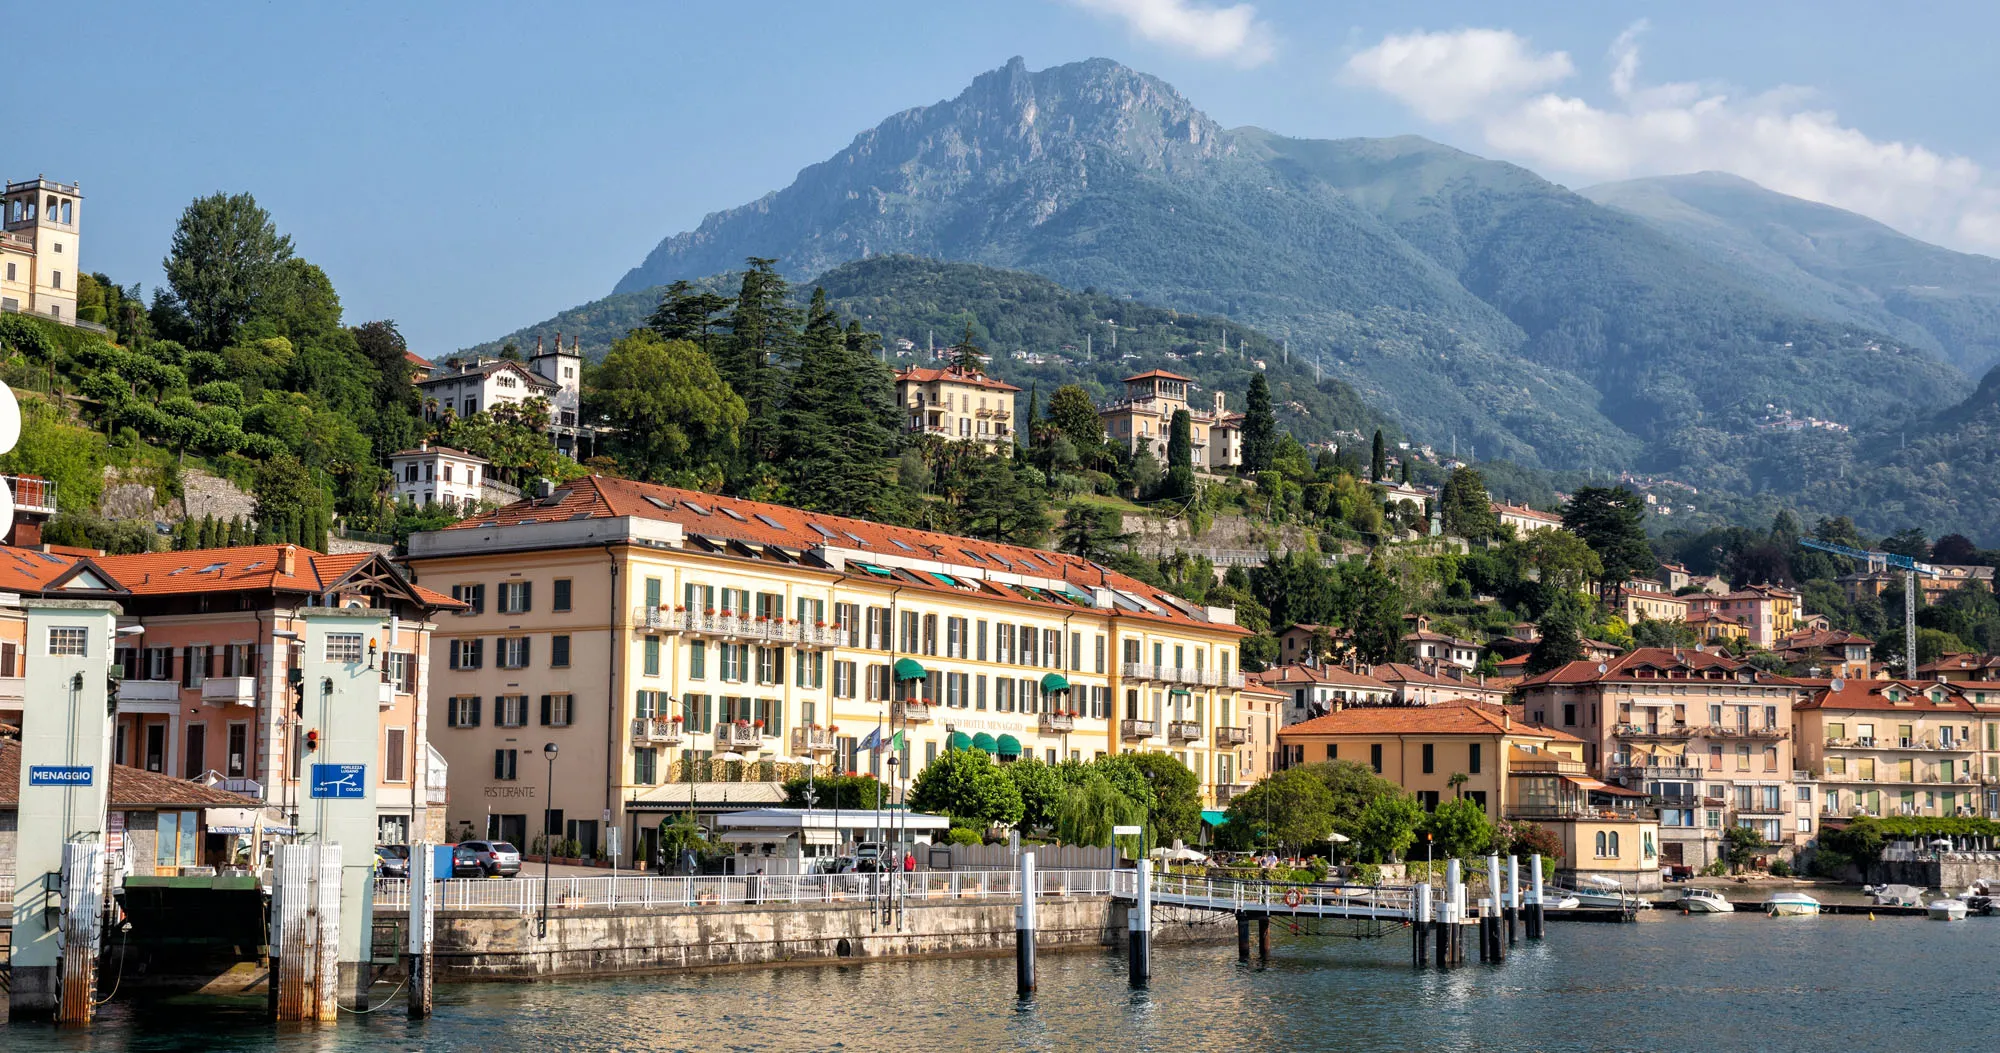 Featured image for “10 Best Day Trips from Lugano, Switzerland”